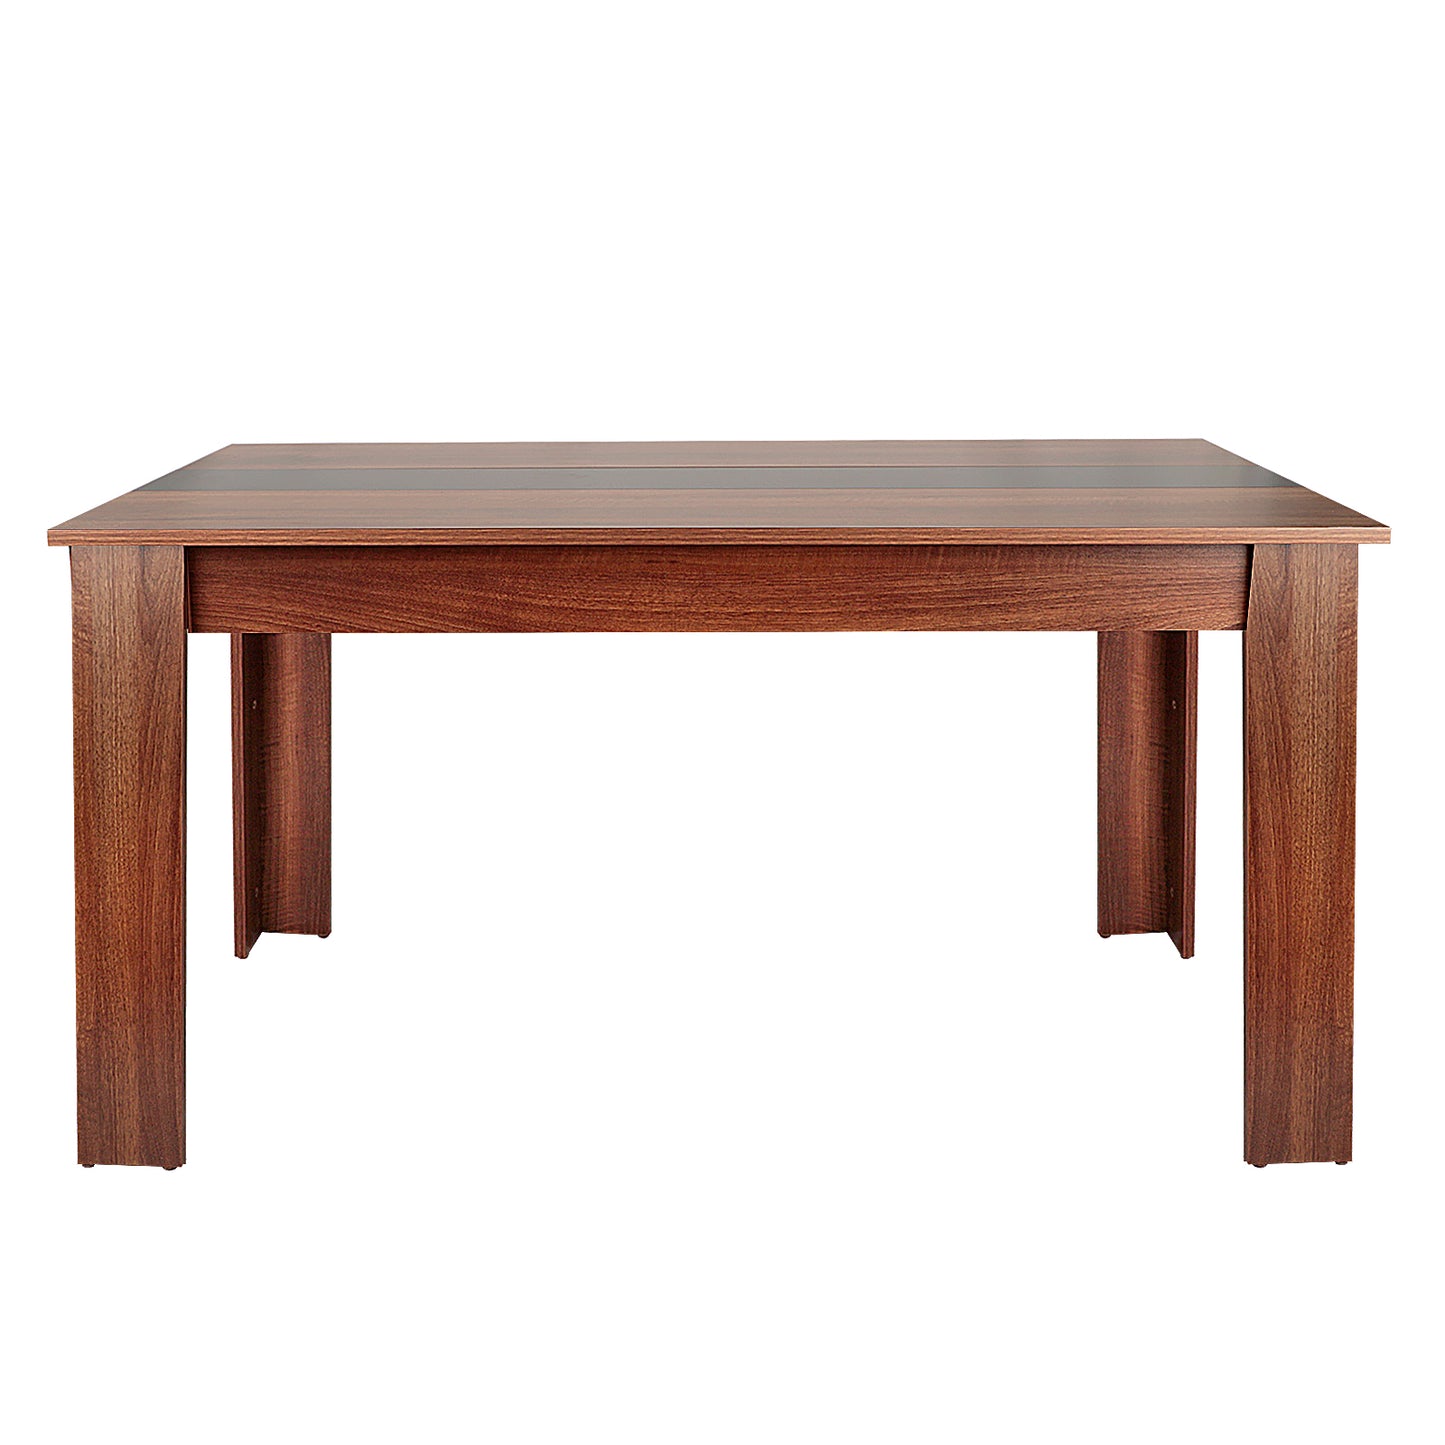 GIVENUSMYF European dining table Height 29.5" Particleboard dark wood with melamine beech wood grain